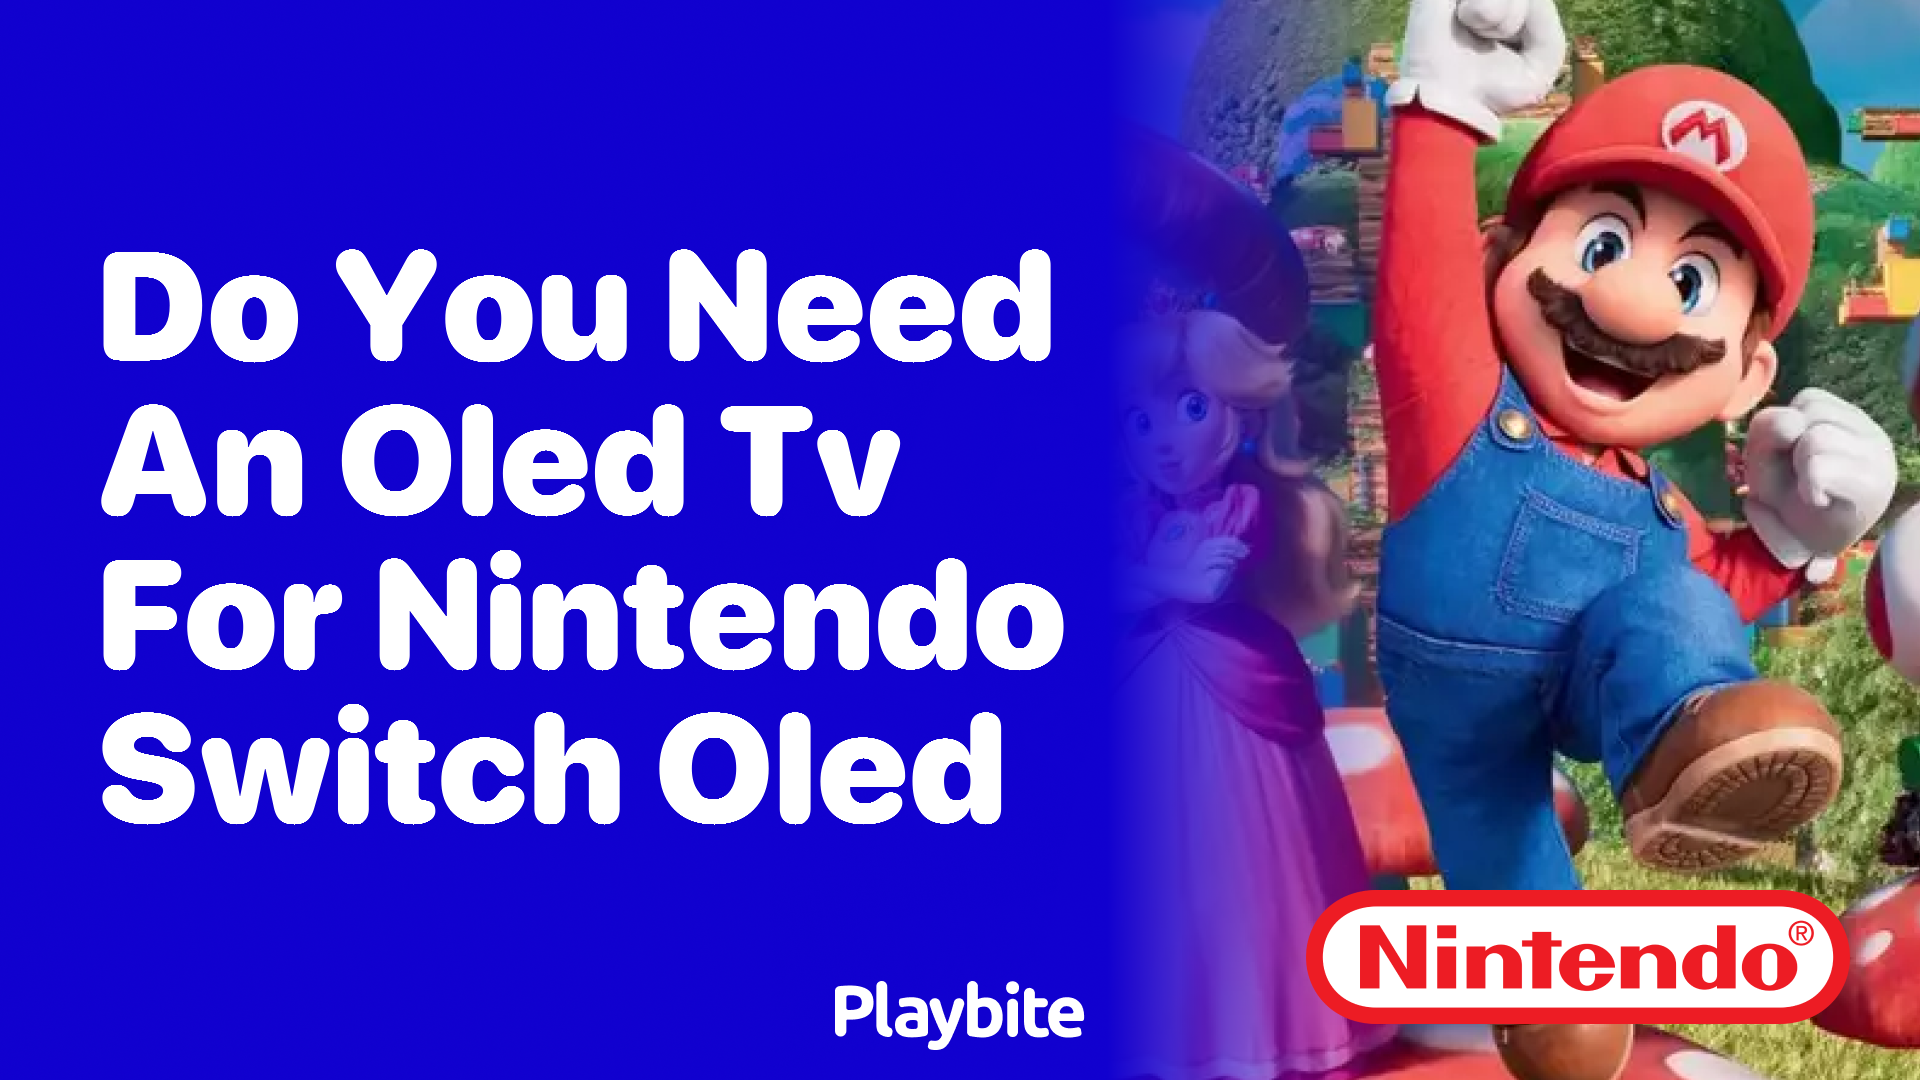 Do You Need an OLED TV for Nintendo Switch OLED?